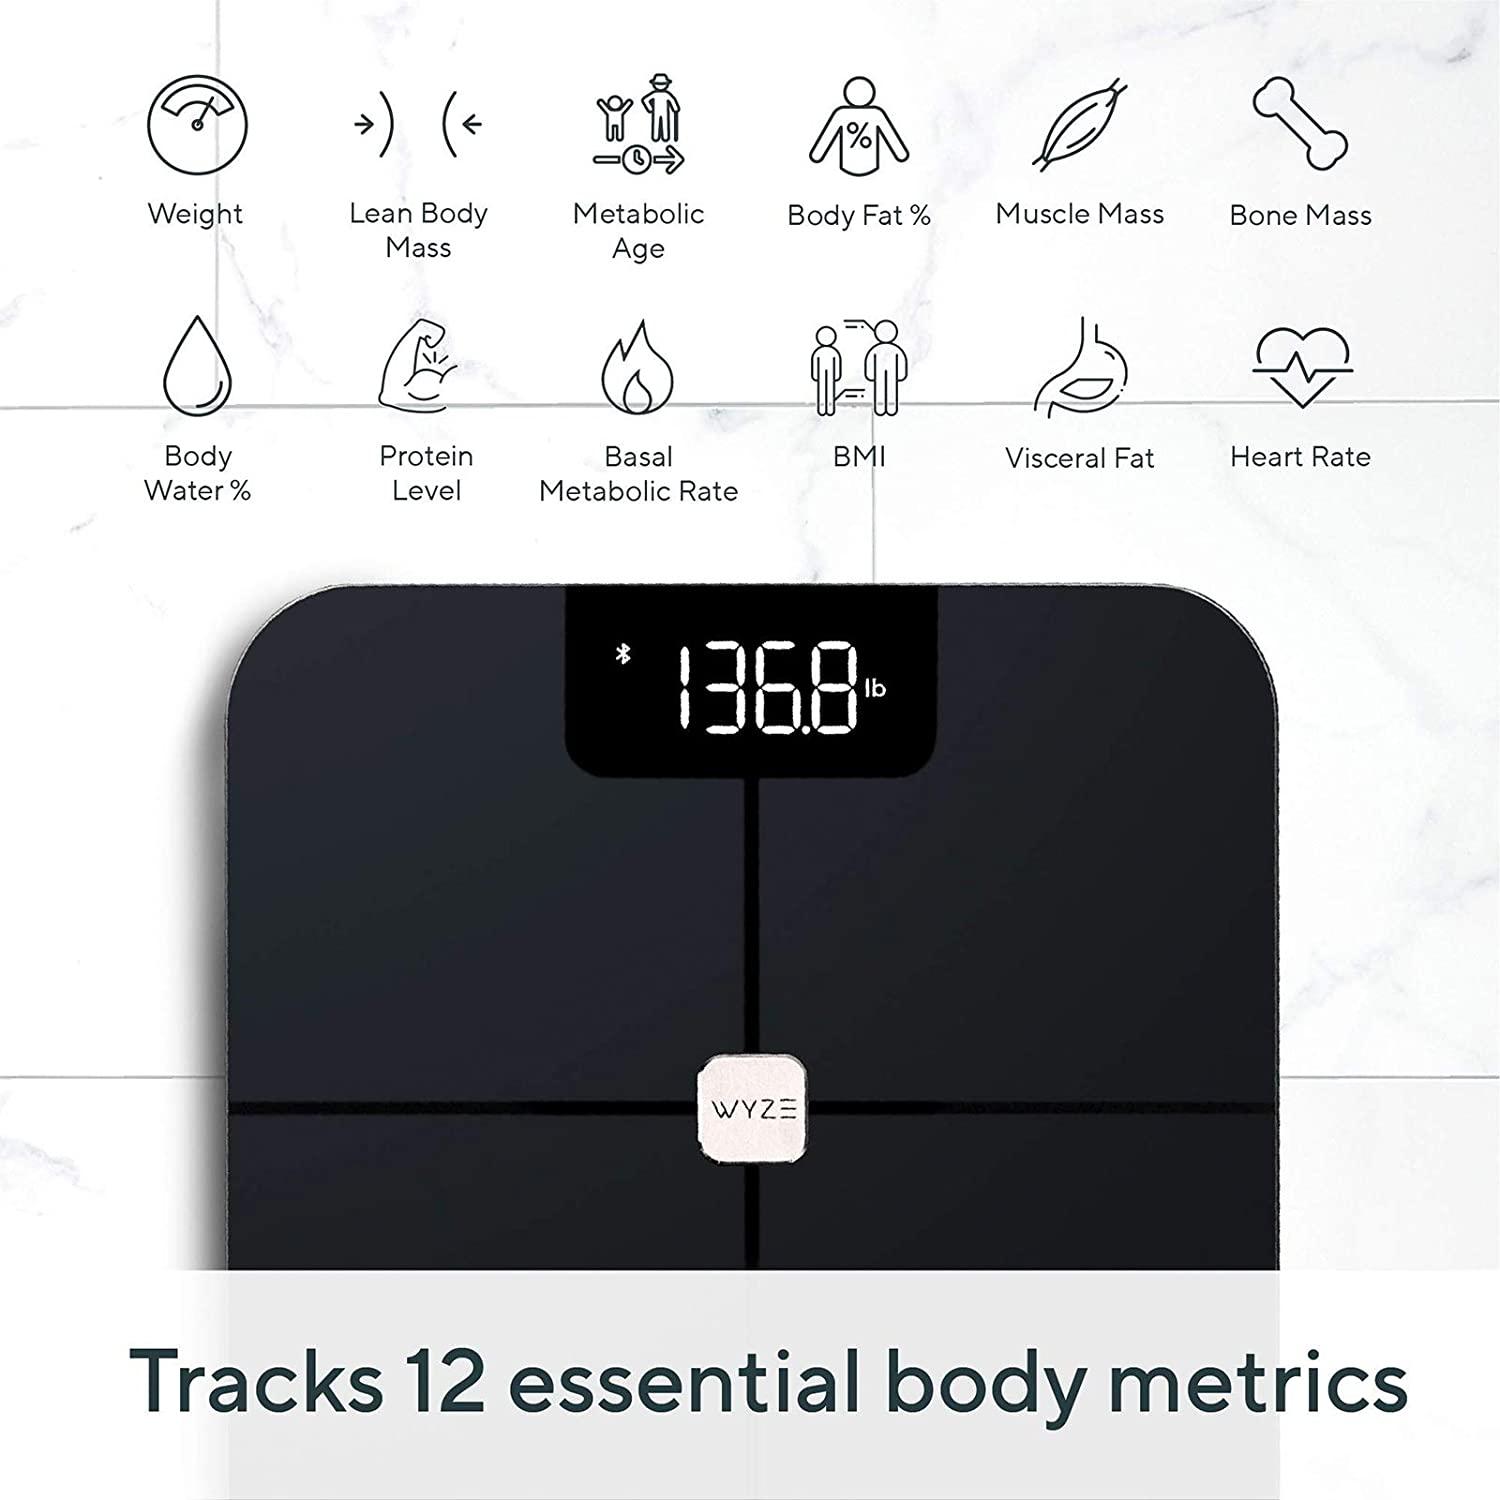 WYZE Scale S, Bluetooth connected Smart scale for Body Weight and